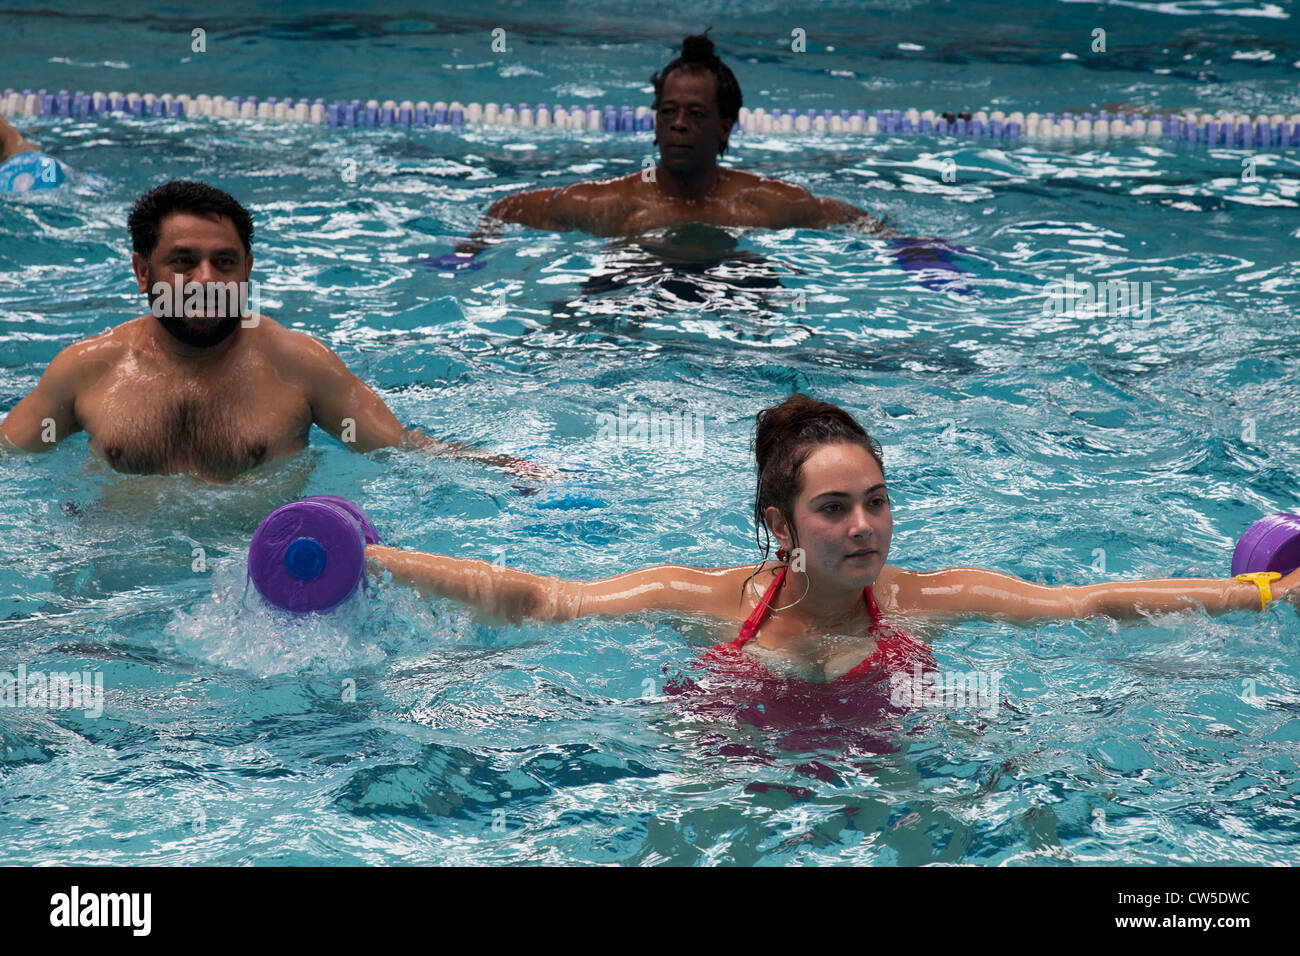 Exercise class at Cally Pool swimming pool, London. People join the class for reasons including weight loss and general fitness. Stock Photo